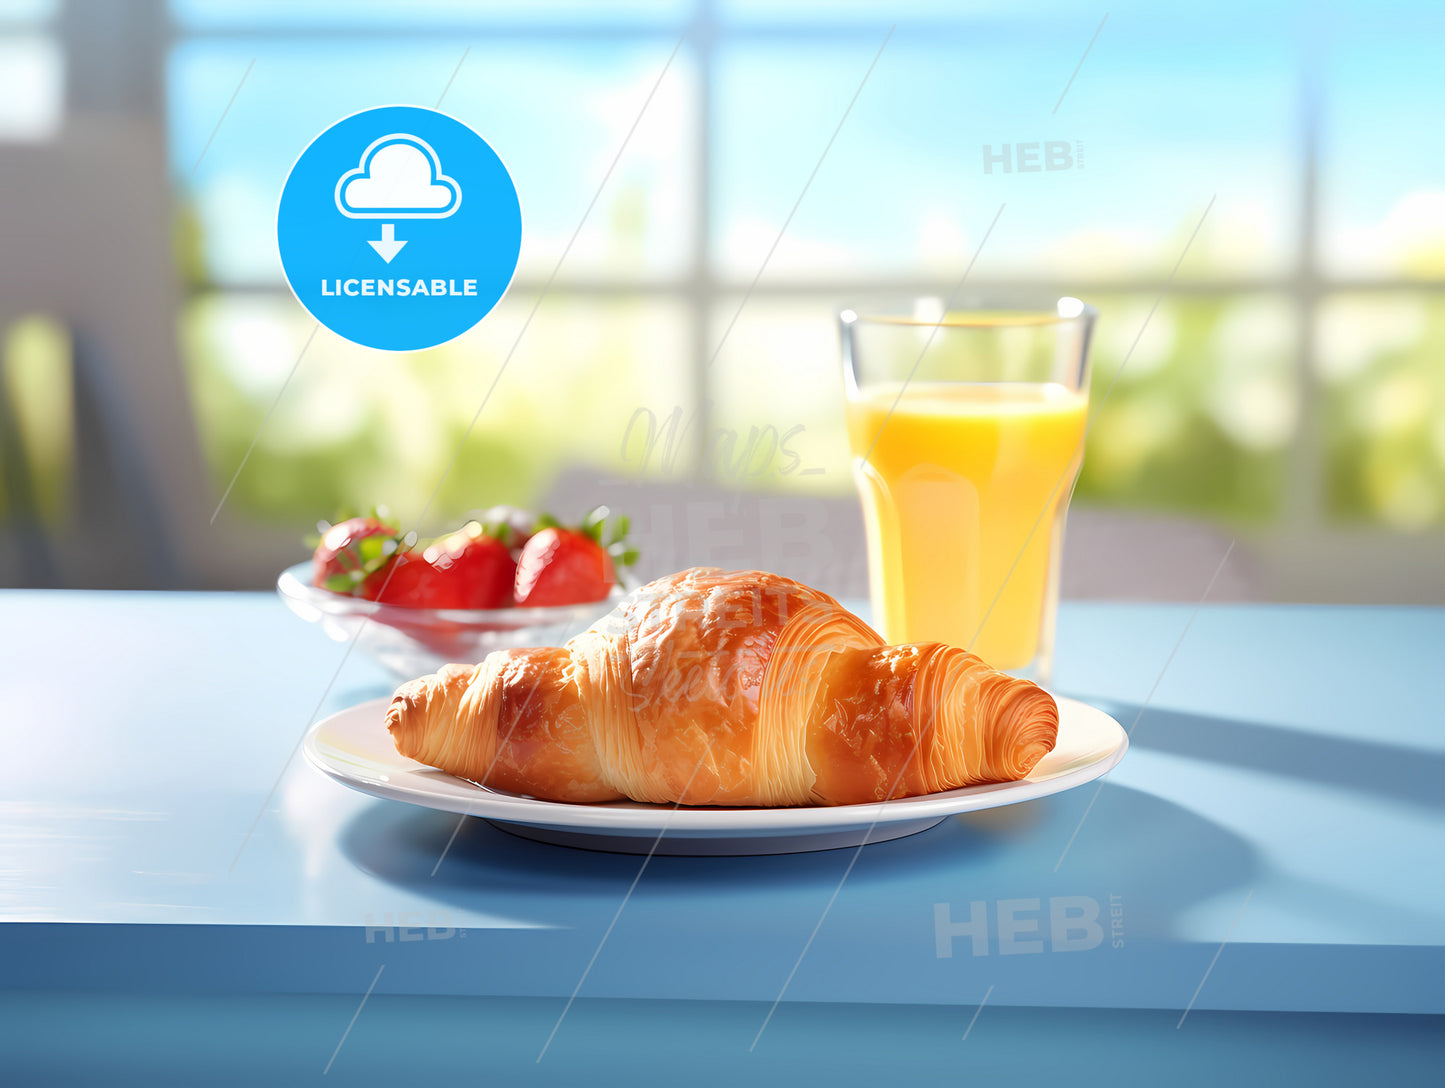 Croissant And A Glass Of Juice On A Table